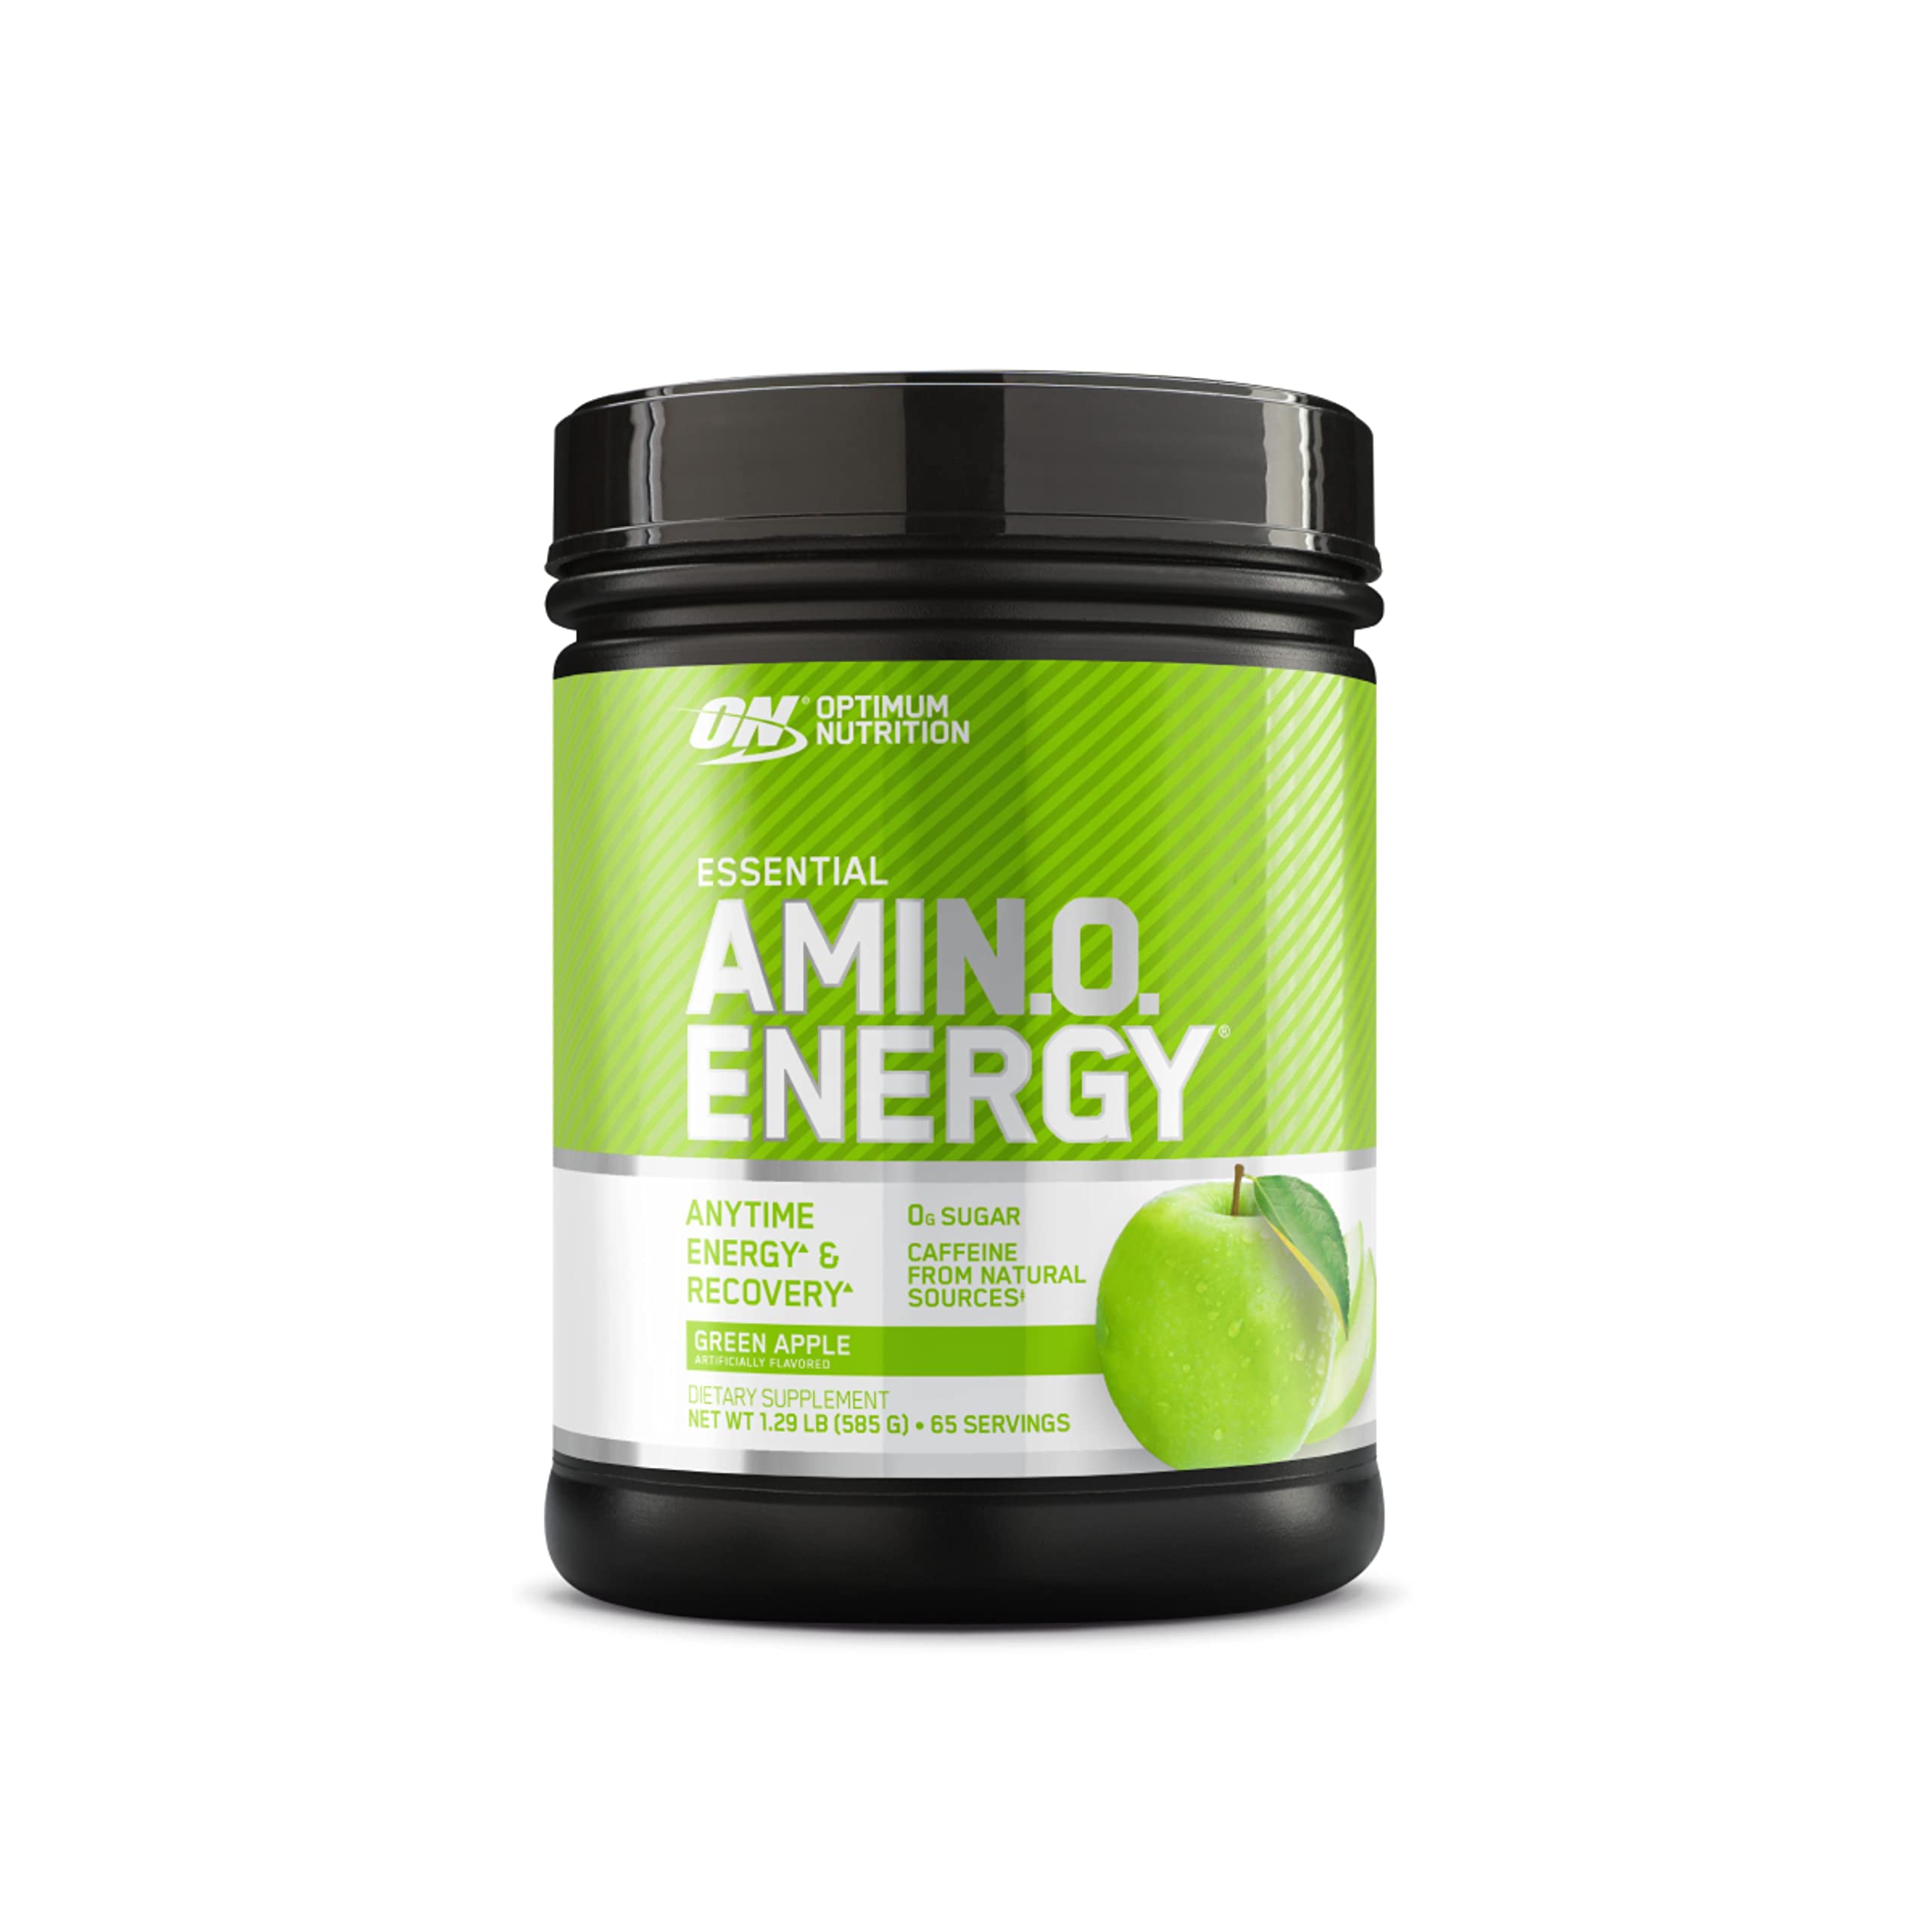 Optimum Nutrition Amino Energy with Green Tea and Green Coffee Extract, Flavor: Green Apple, 65 Servings, 1.29 Pound (Pack of 1)